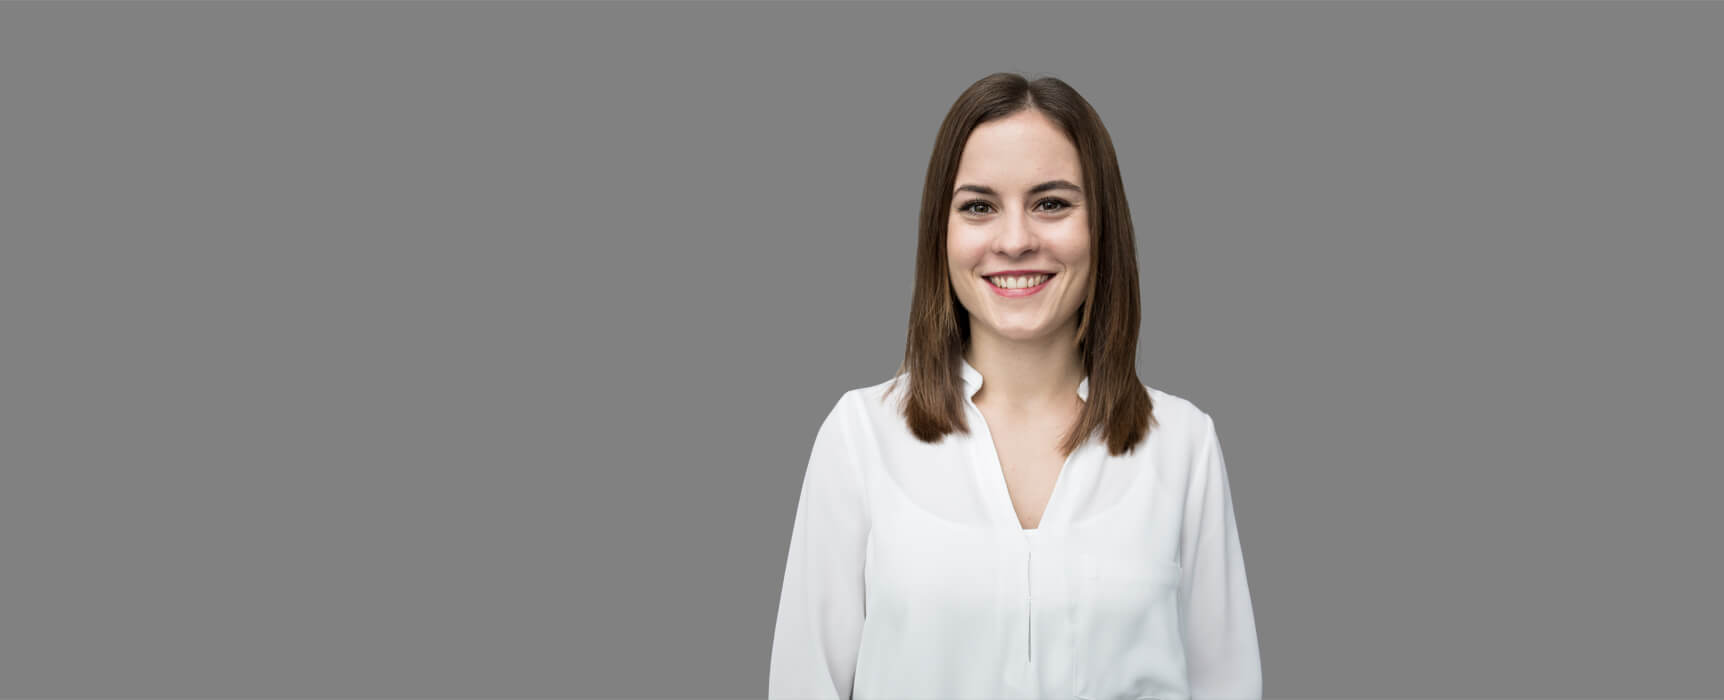 AC assistenza & consulting: Commercialista Marie-Christine Lindl